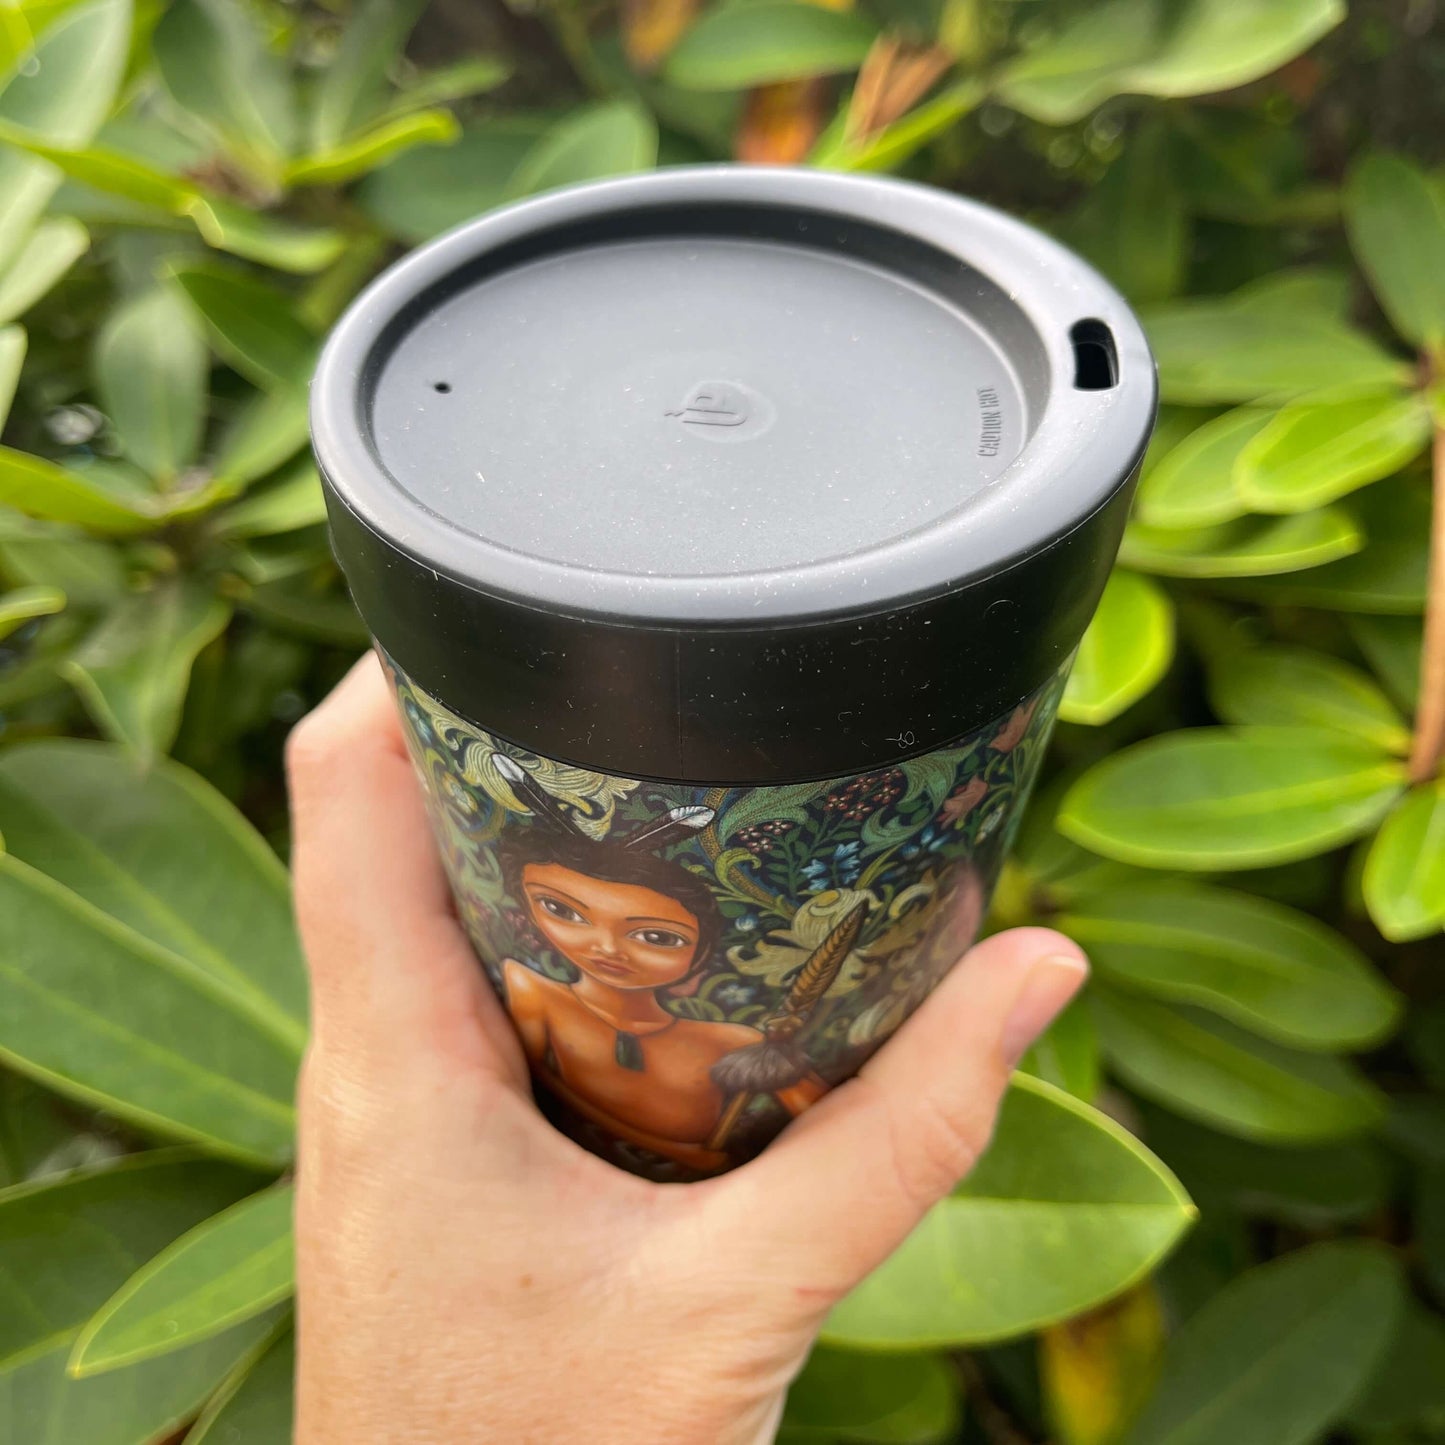 Black reusable coffee cup featuring a floral wrap and featuring an artists image of a young Māori boy with most of the image showing the black lid and sipper hole.